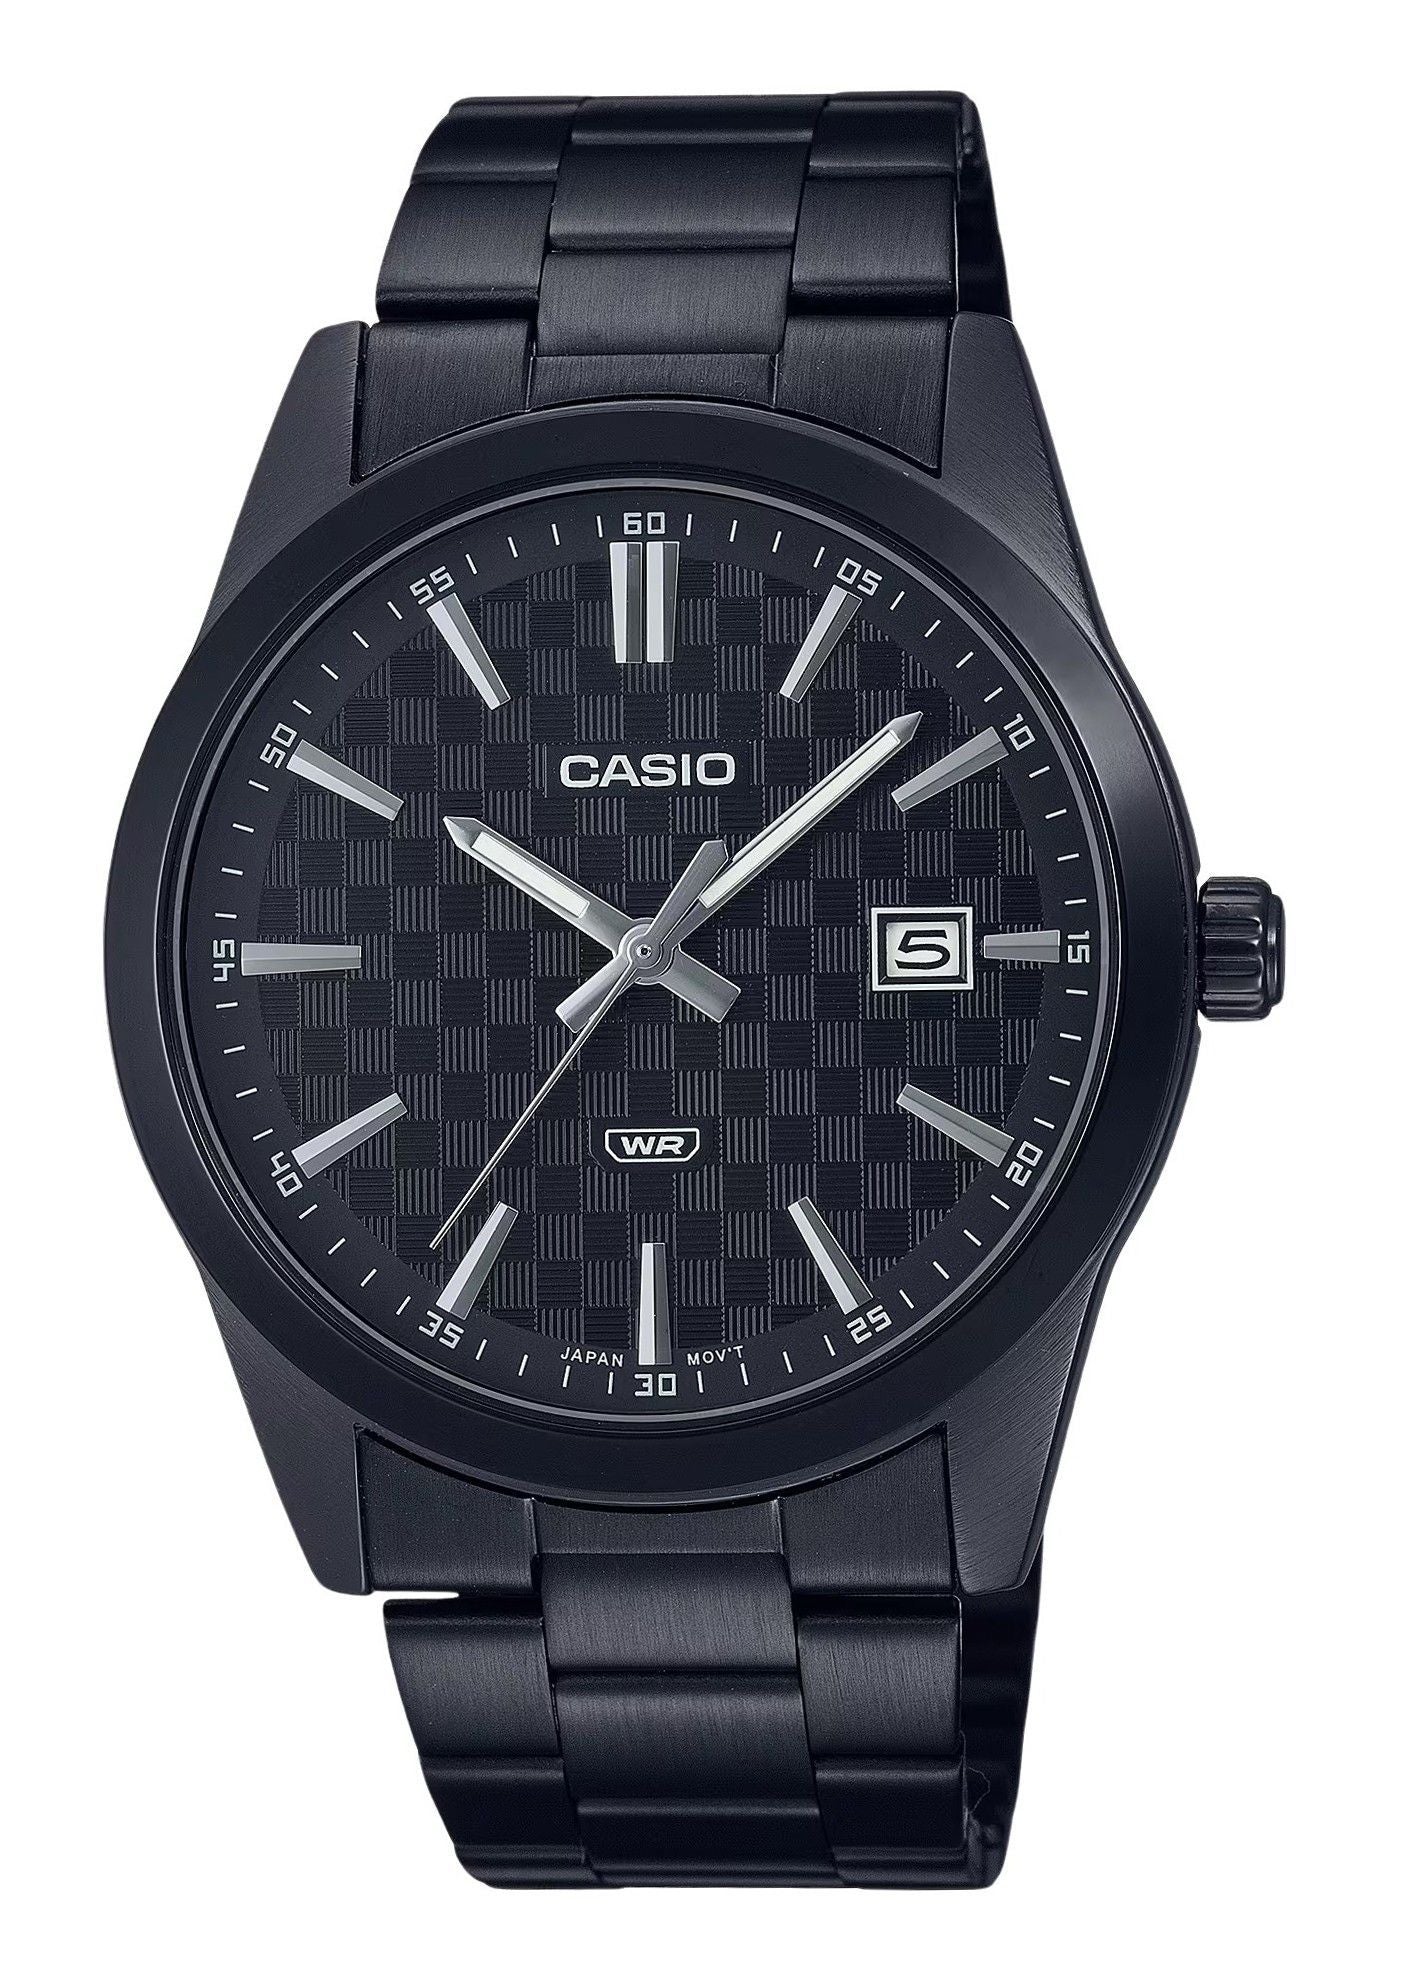 Casio Standard Analog Black Ion Plated Stainless Steel Black Dial Quartz MTP-VD03B-1A Men's Watch